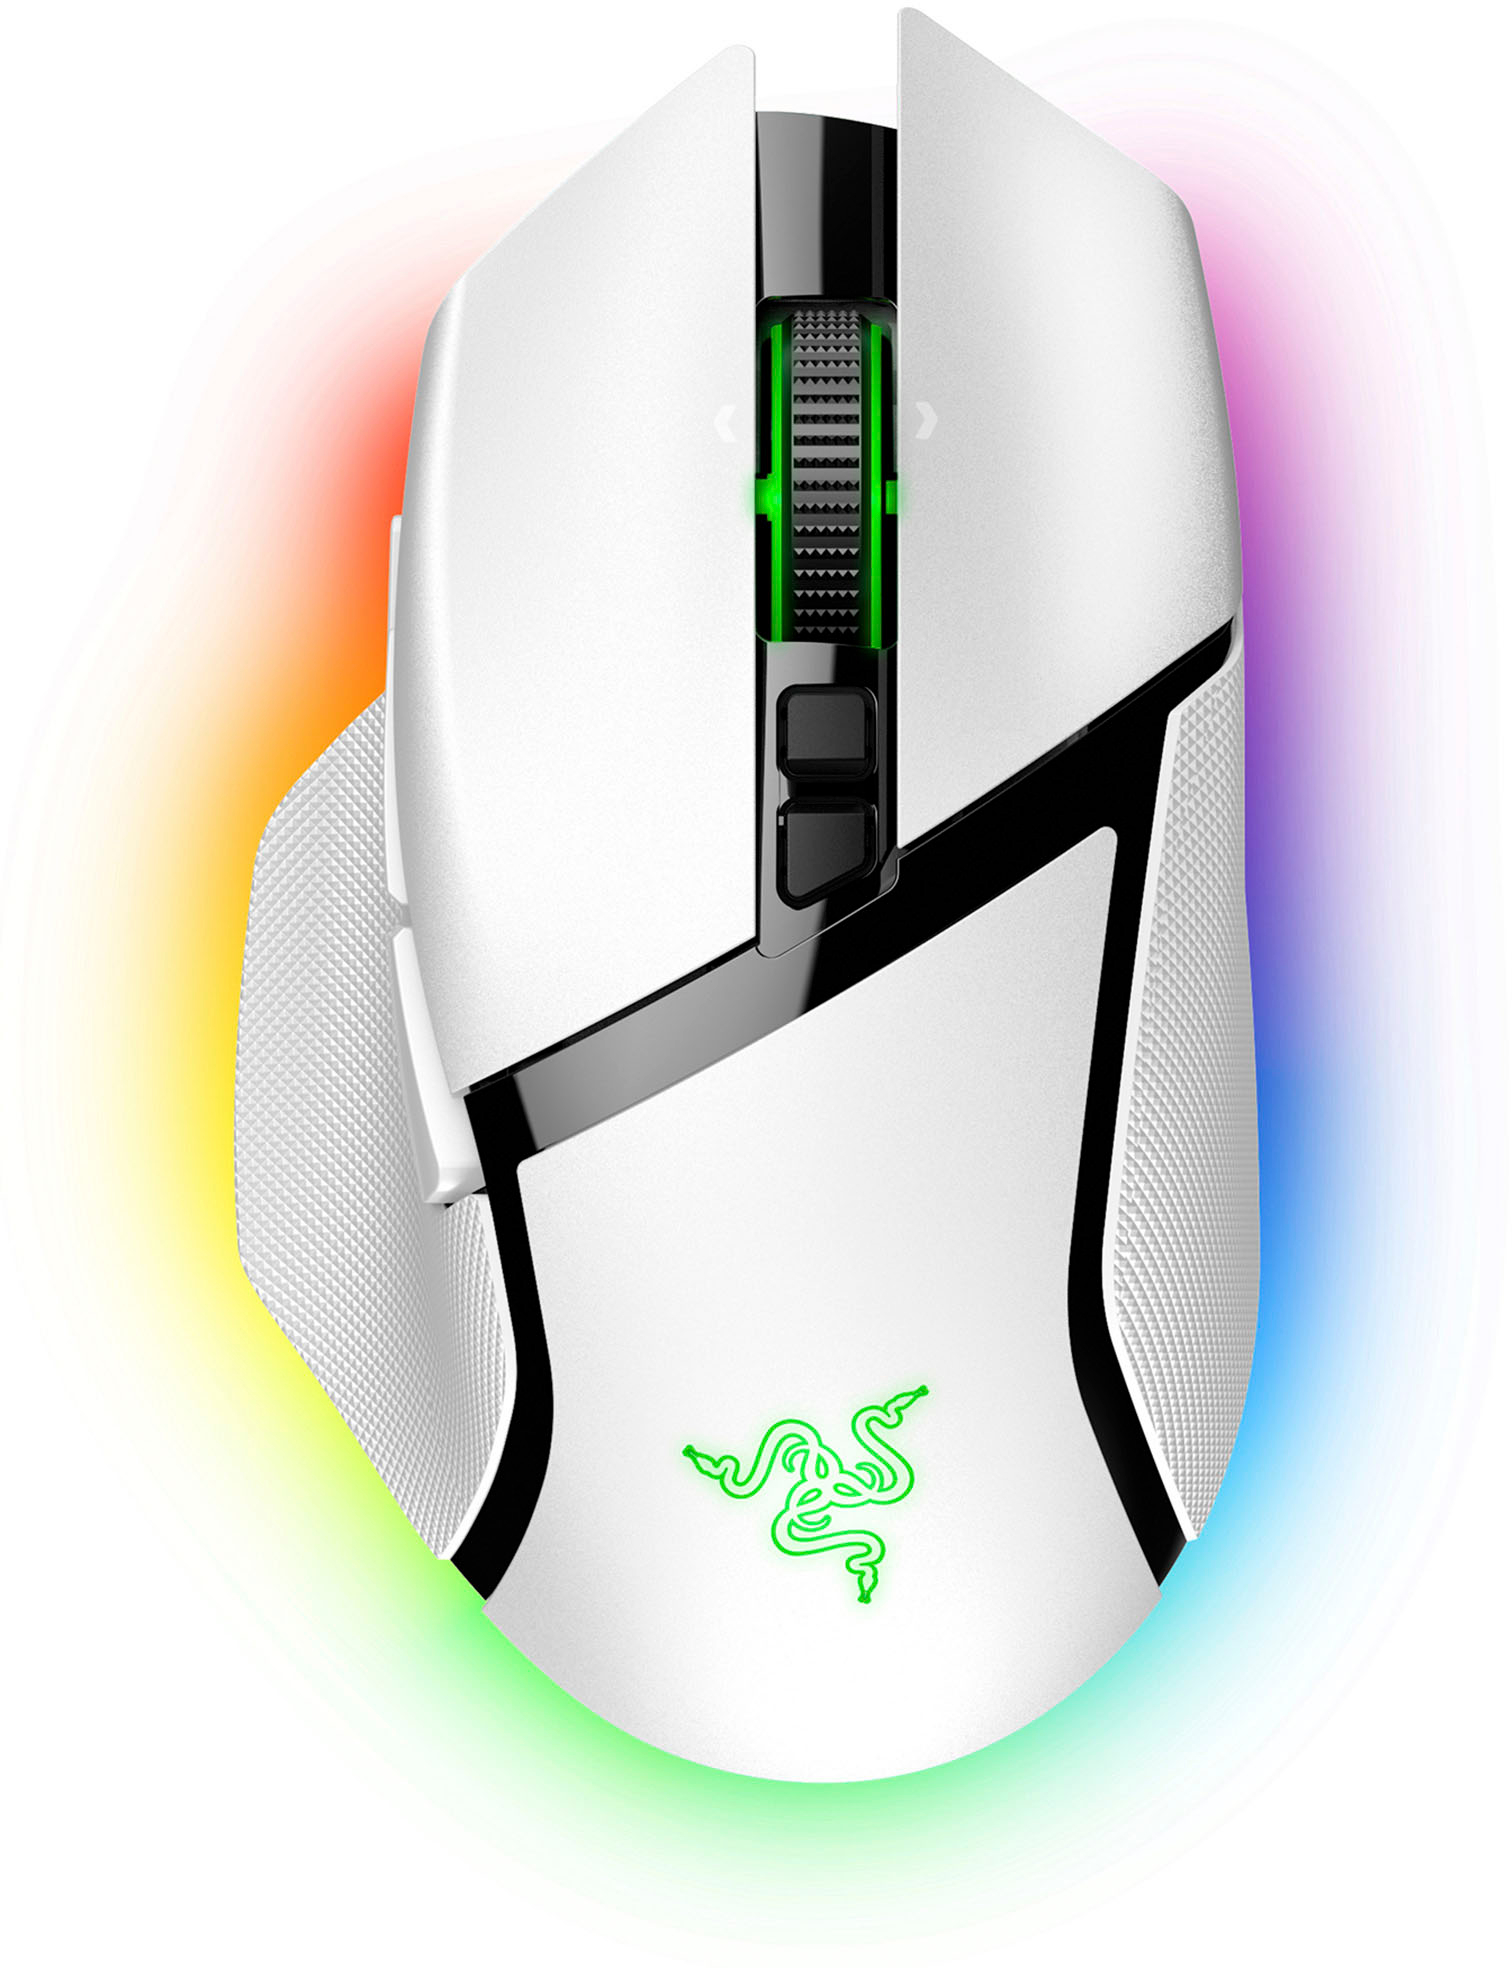 Razer Viper V2 Pro review: The new king of wireless gaming mice